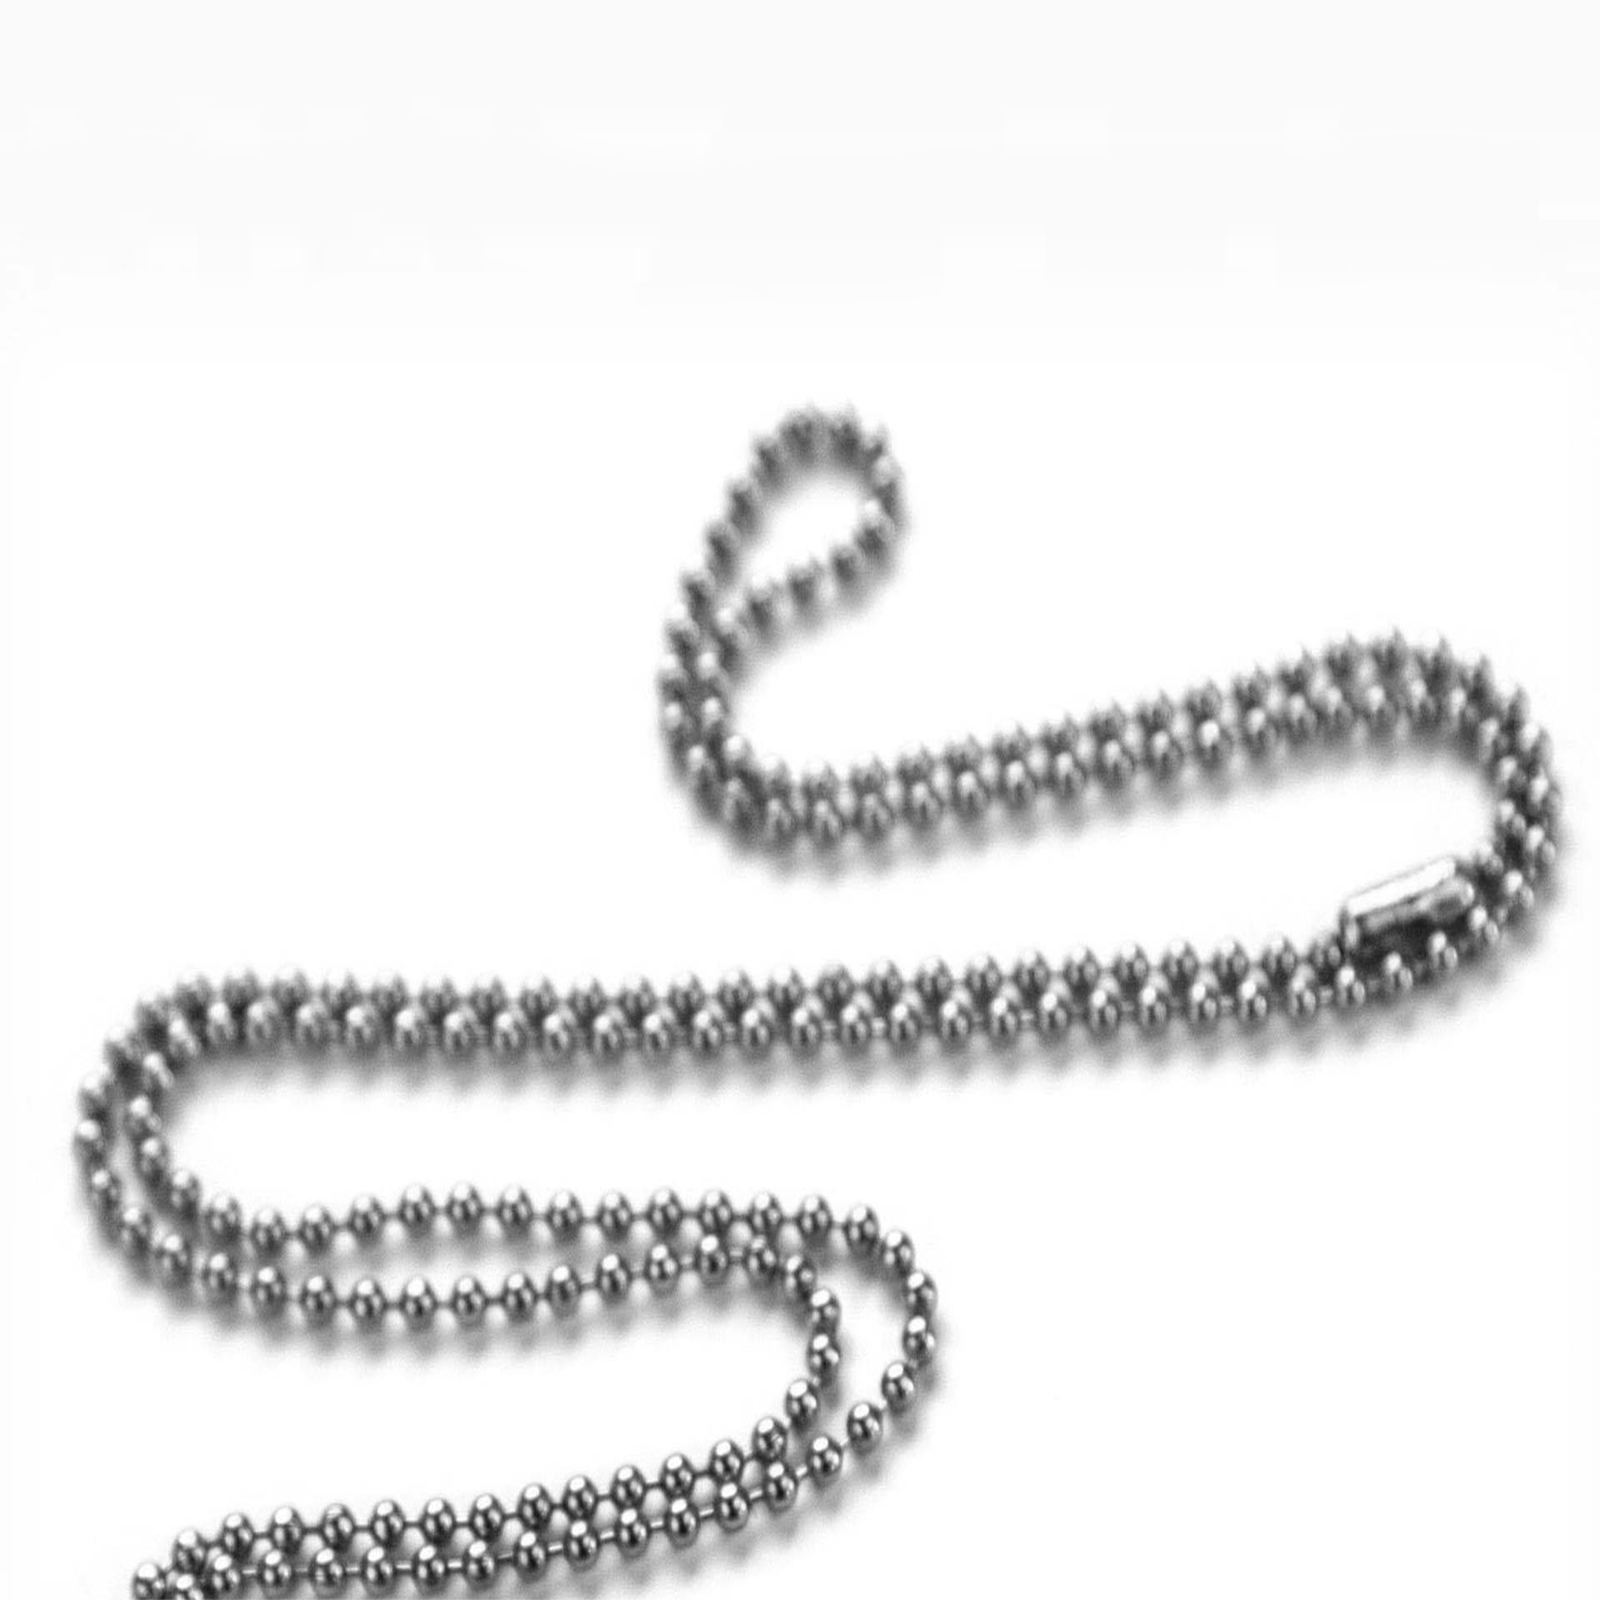 FIXX iD Replacement Chain